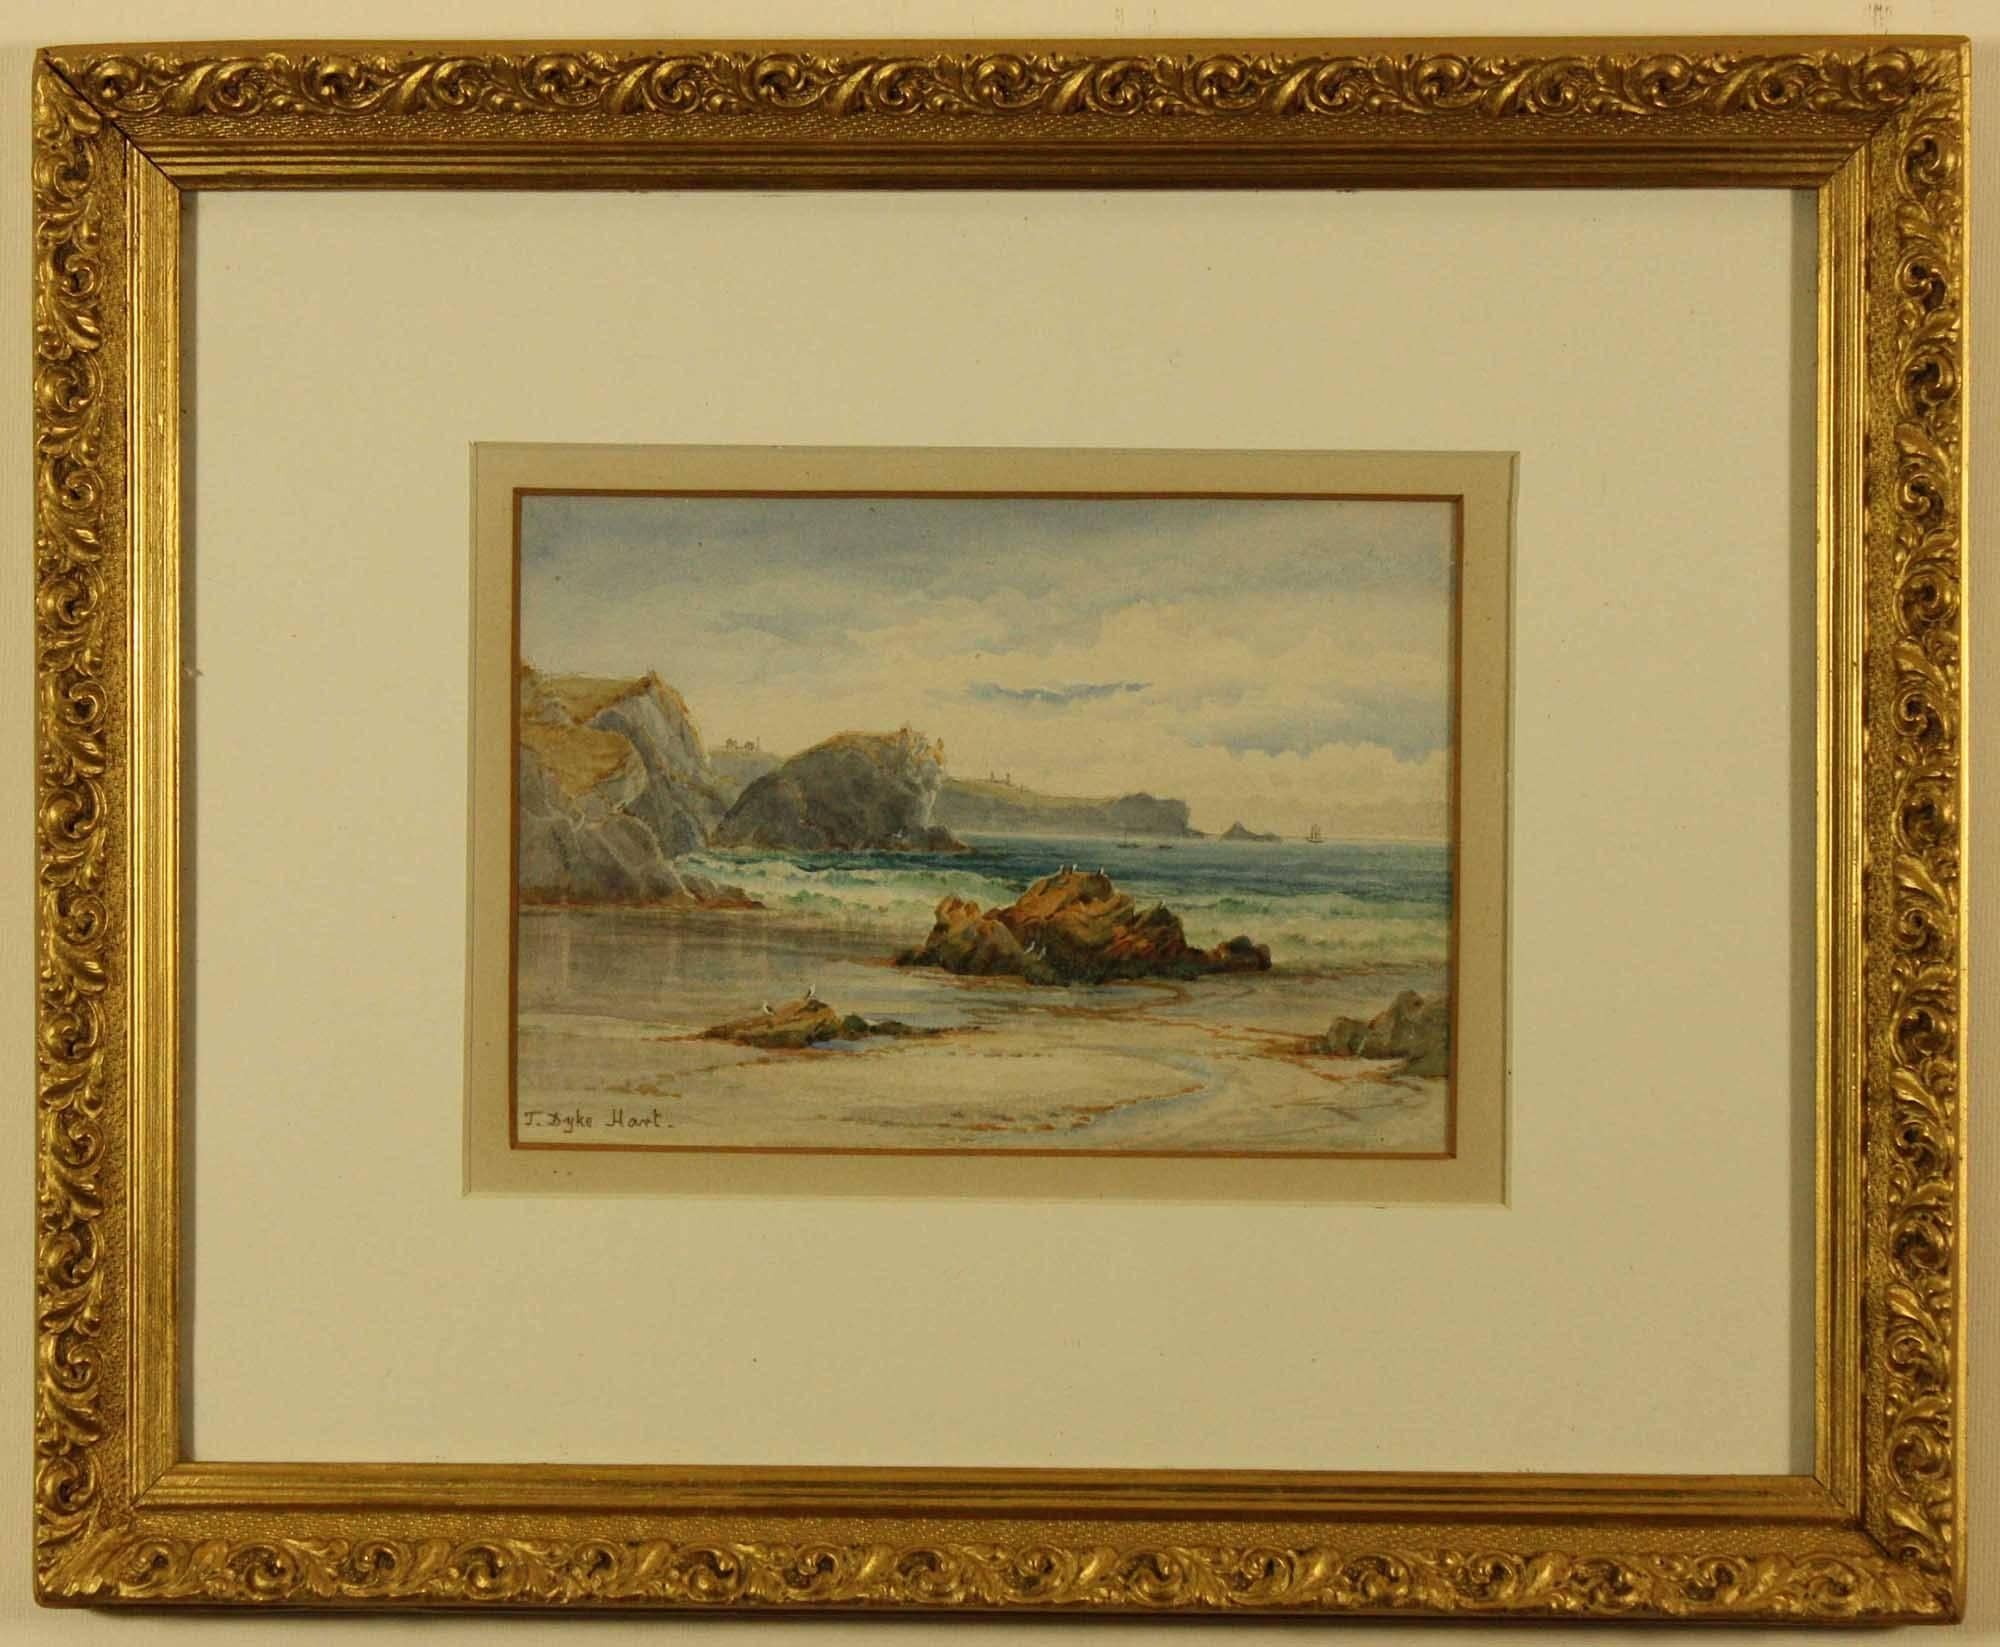 Lion Rock and the Lizard Point by Tracey Dyke Hart
Watercolour in Original Frame, New Mount and back board
Image Size   7 ins by 4 1/2 ins 
Frame Overall  13 3/4 ins by 11 1/4 ins

Tracey Douglas ( Dyke ) Hart 
born 1870 The Lizard, Cornwall.   Died